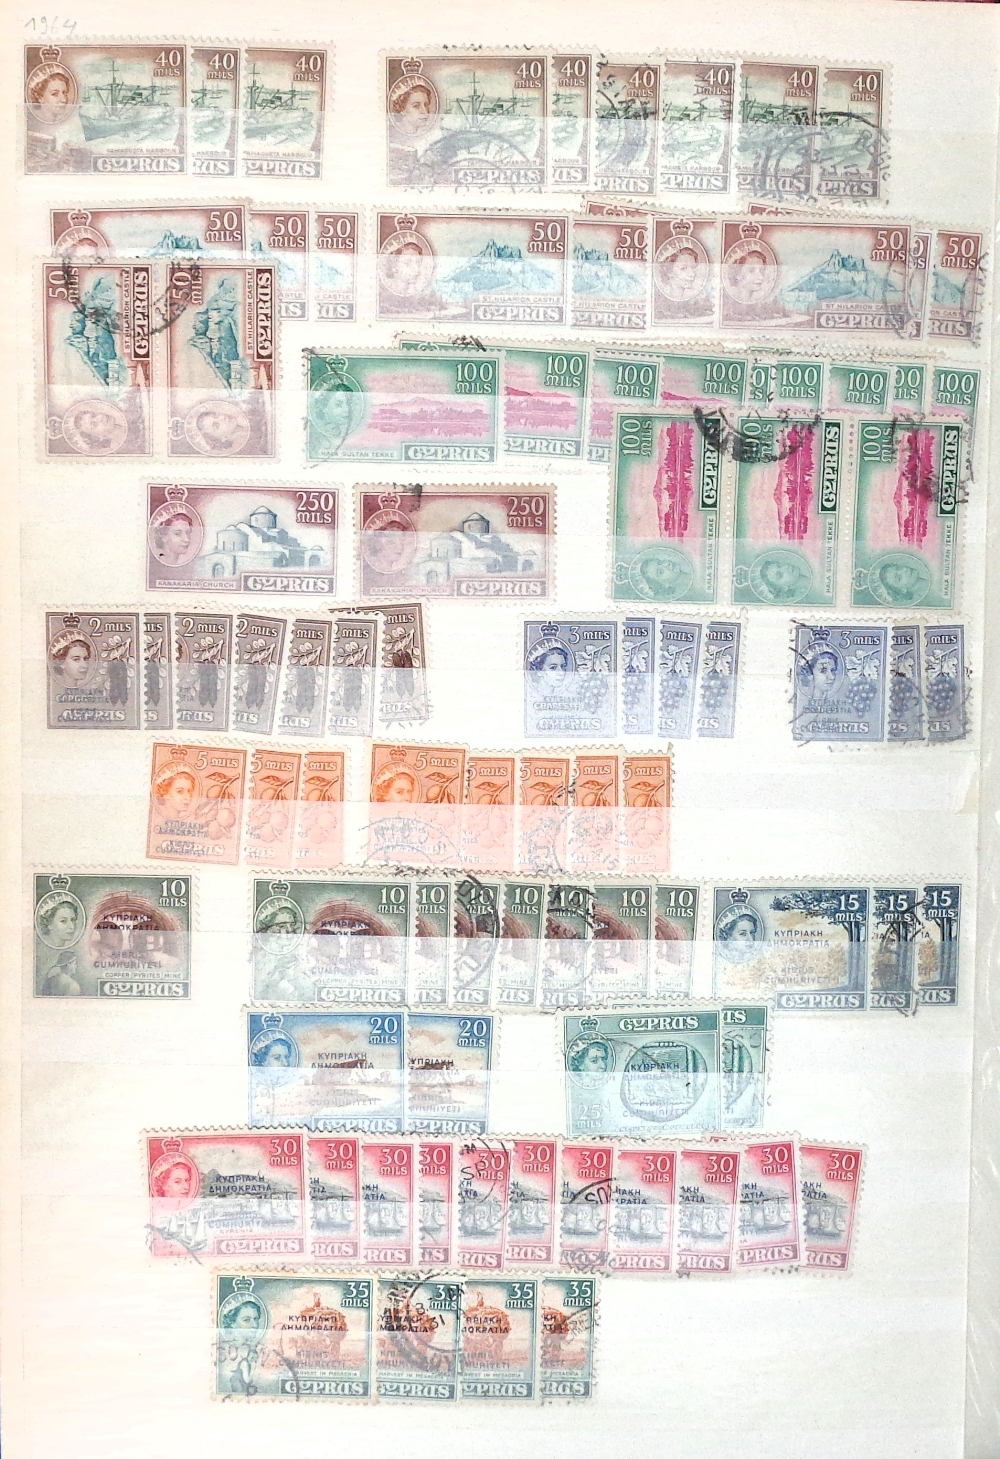 Stamps, Retired dealer's collection of Cyprus stamps, mainly used. housed in a 64 side stockbook. - Image 2 of 4